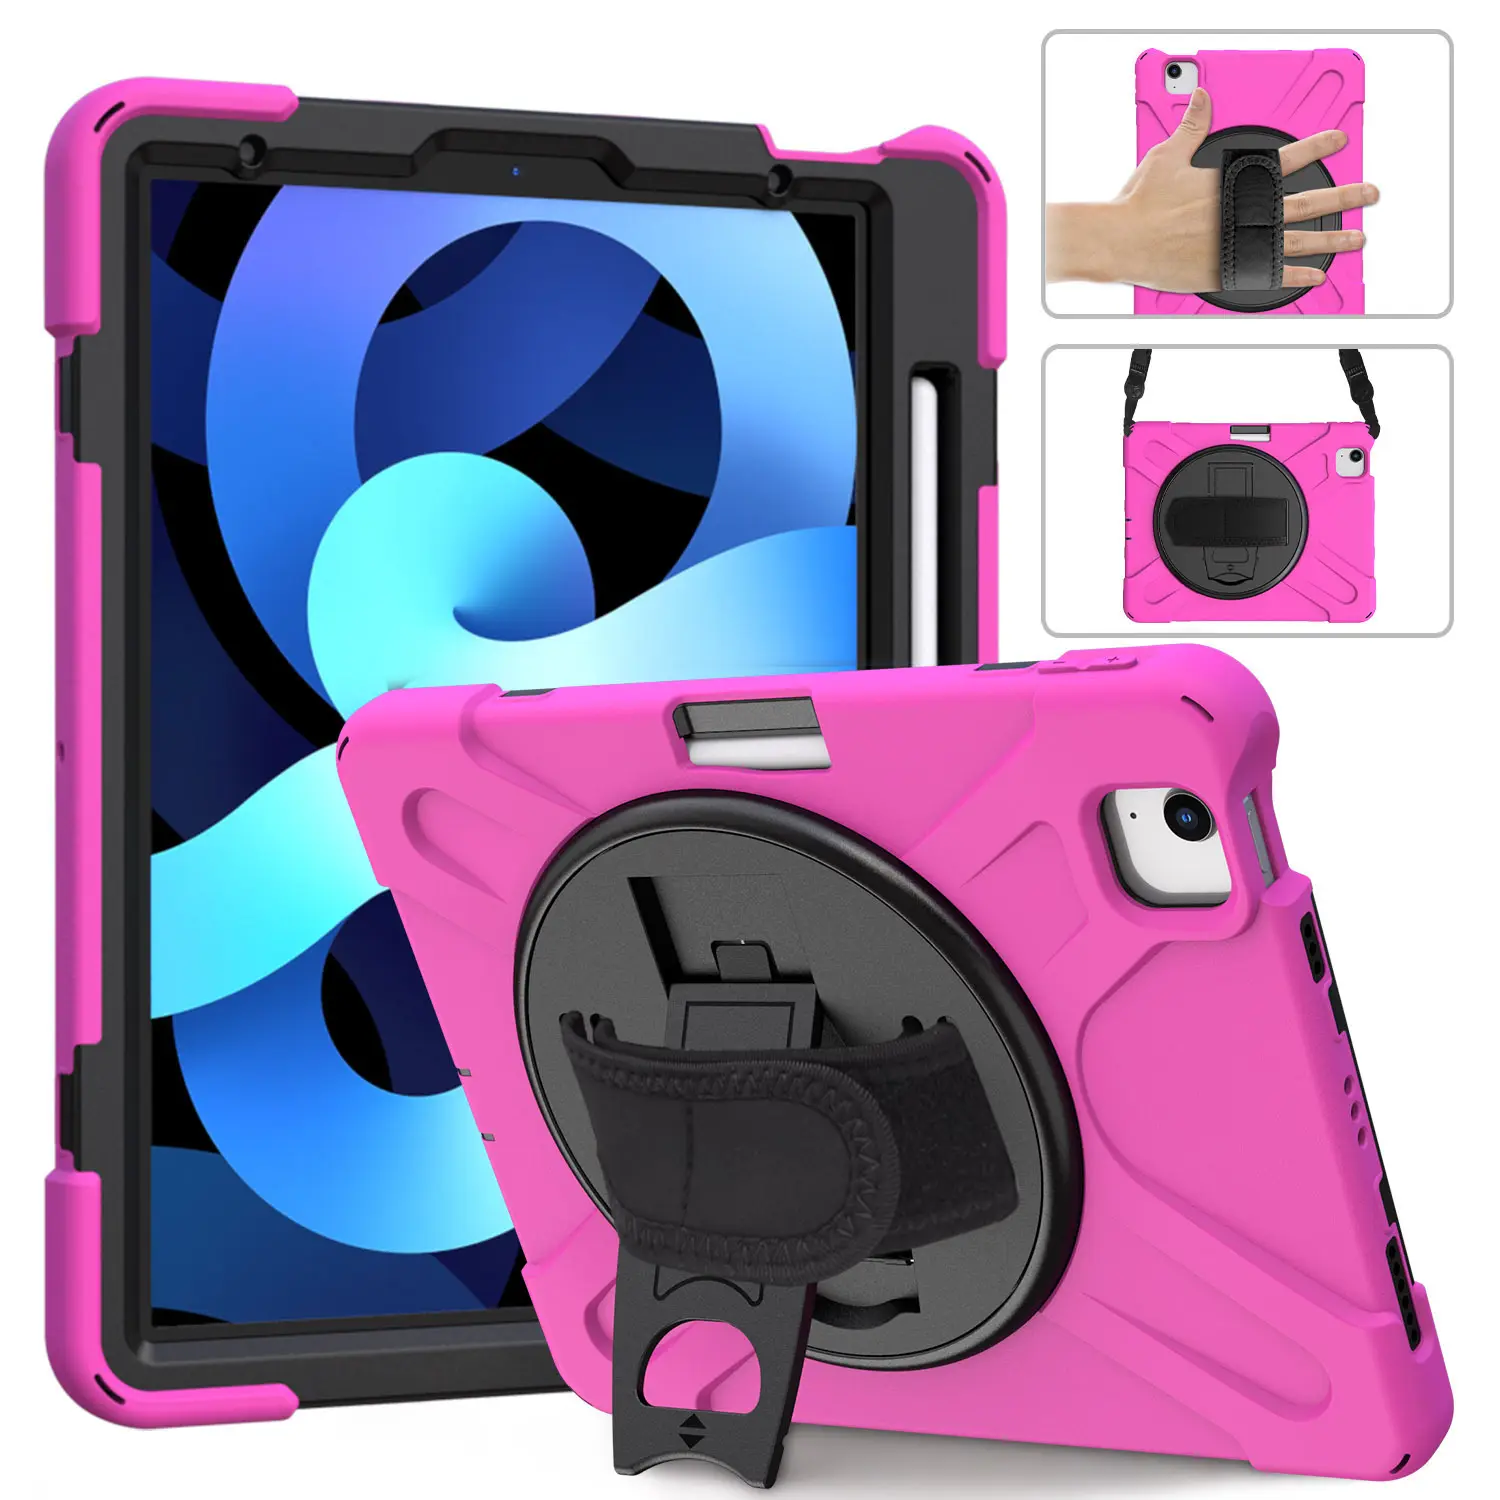 For Samsung Galaxy Tab Active 2 SM-T395 SM-T390 Case 360 Rotating Handle with Hand Strap Neck Strap,Shockproof Protection Cover